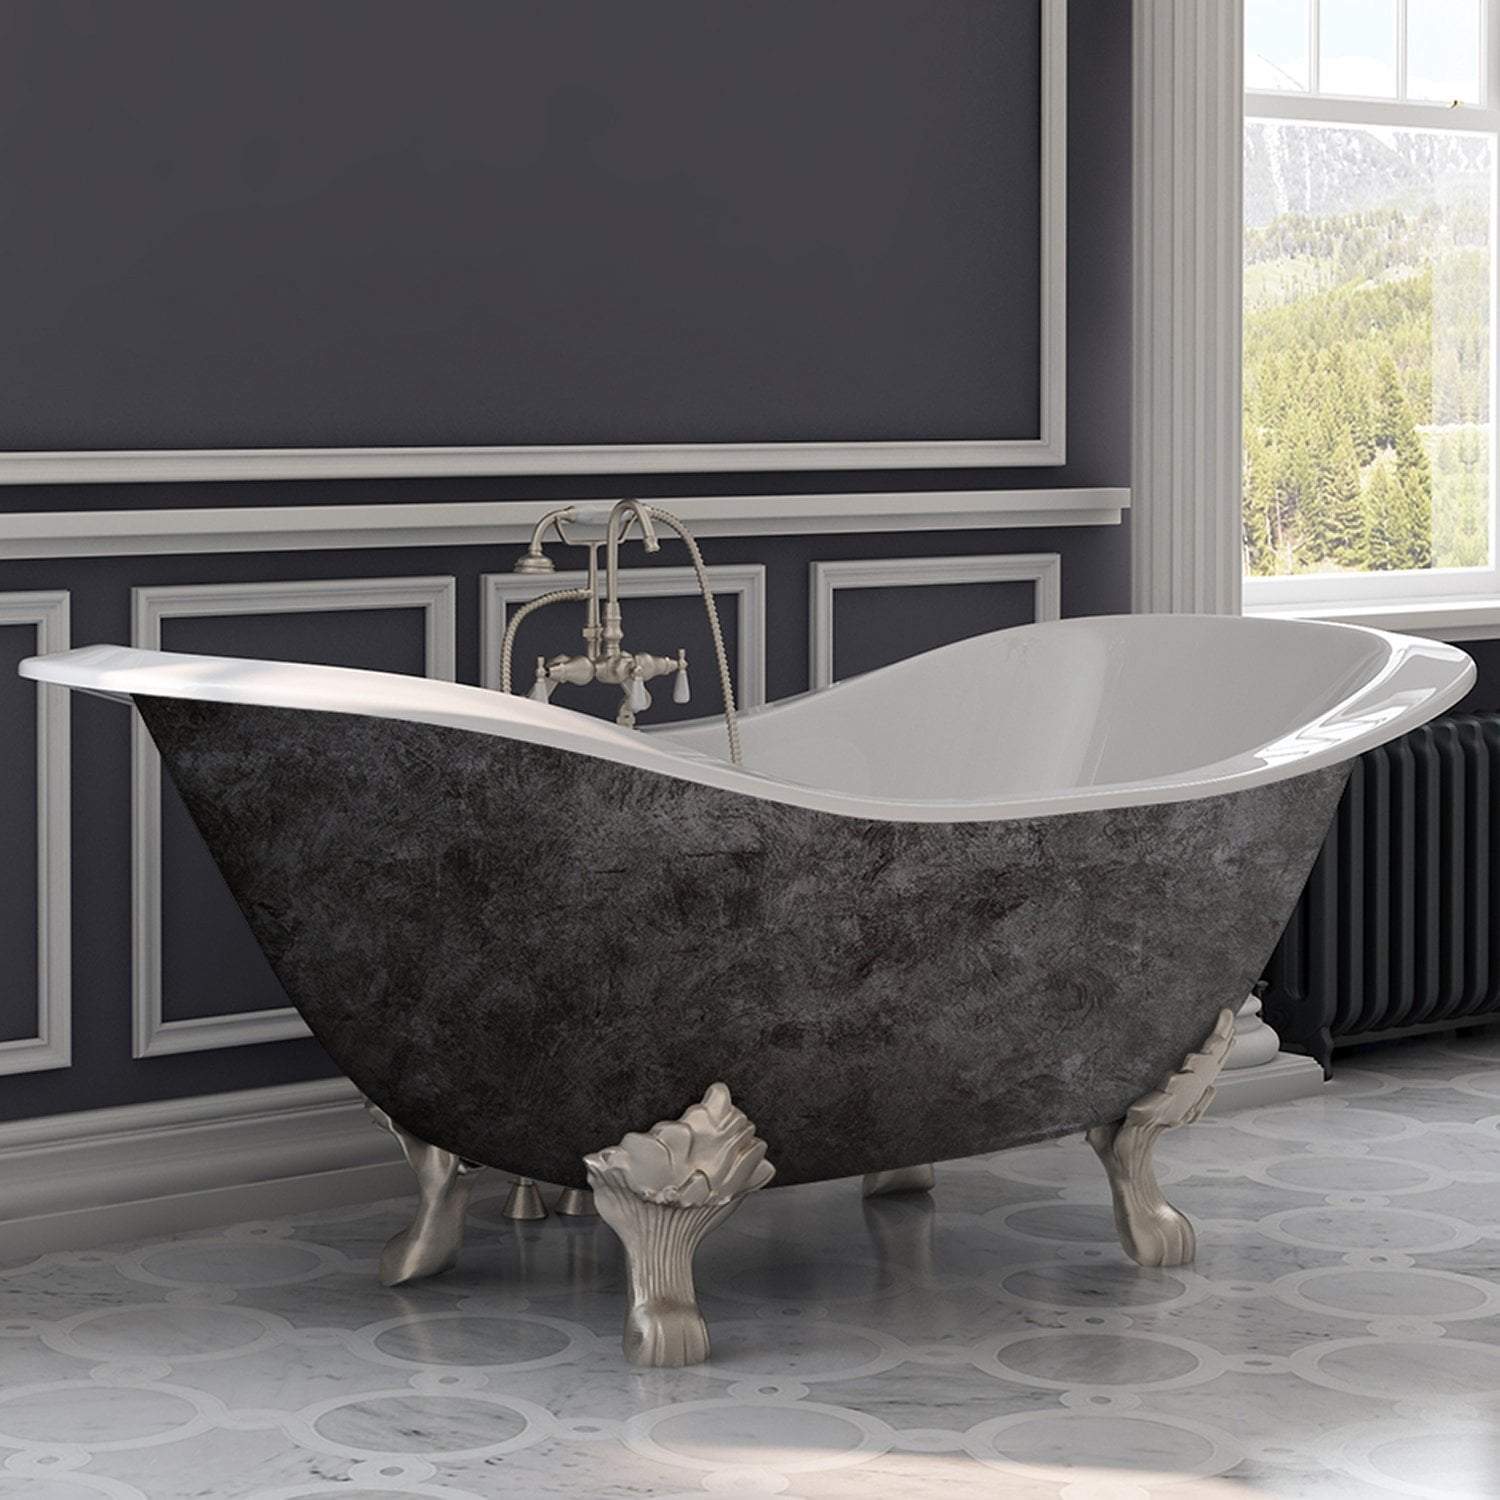 Scorched Platinum 71” Cast Iron Double Slipper Tub, Brushed Nickel Lion’s Paw Feet, 7 Inch Deck Mount Faucet Holes